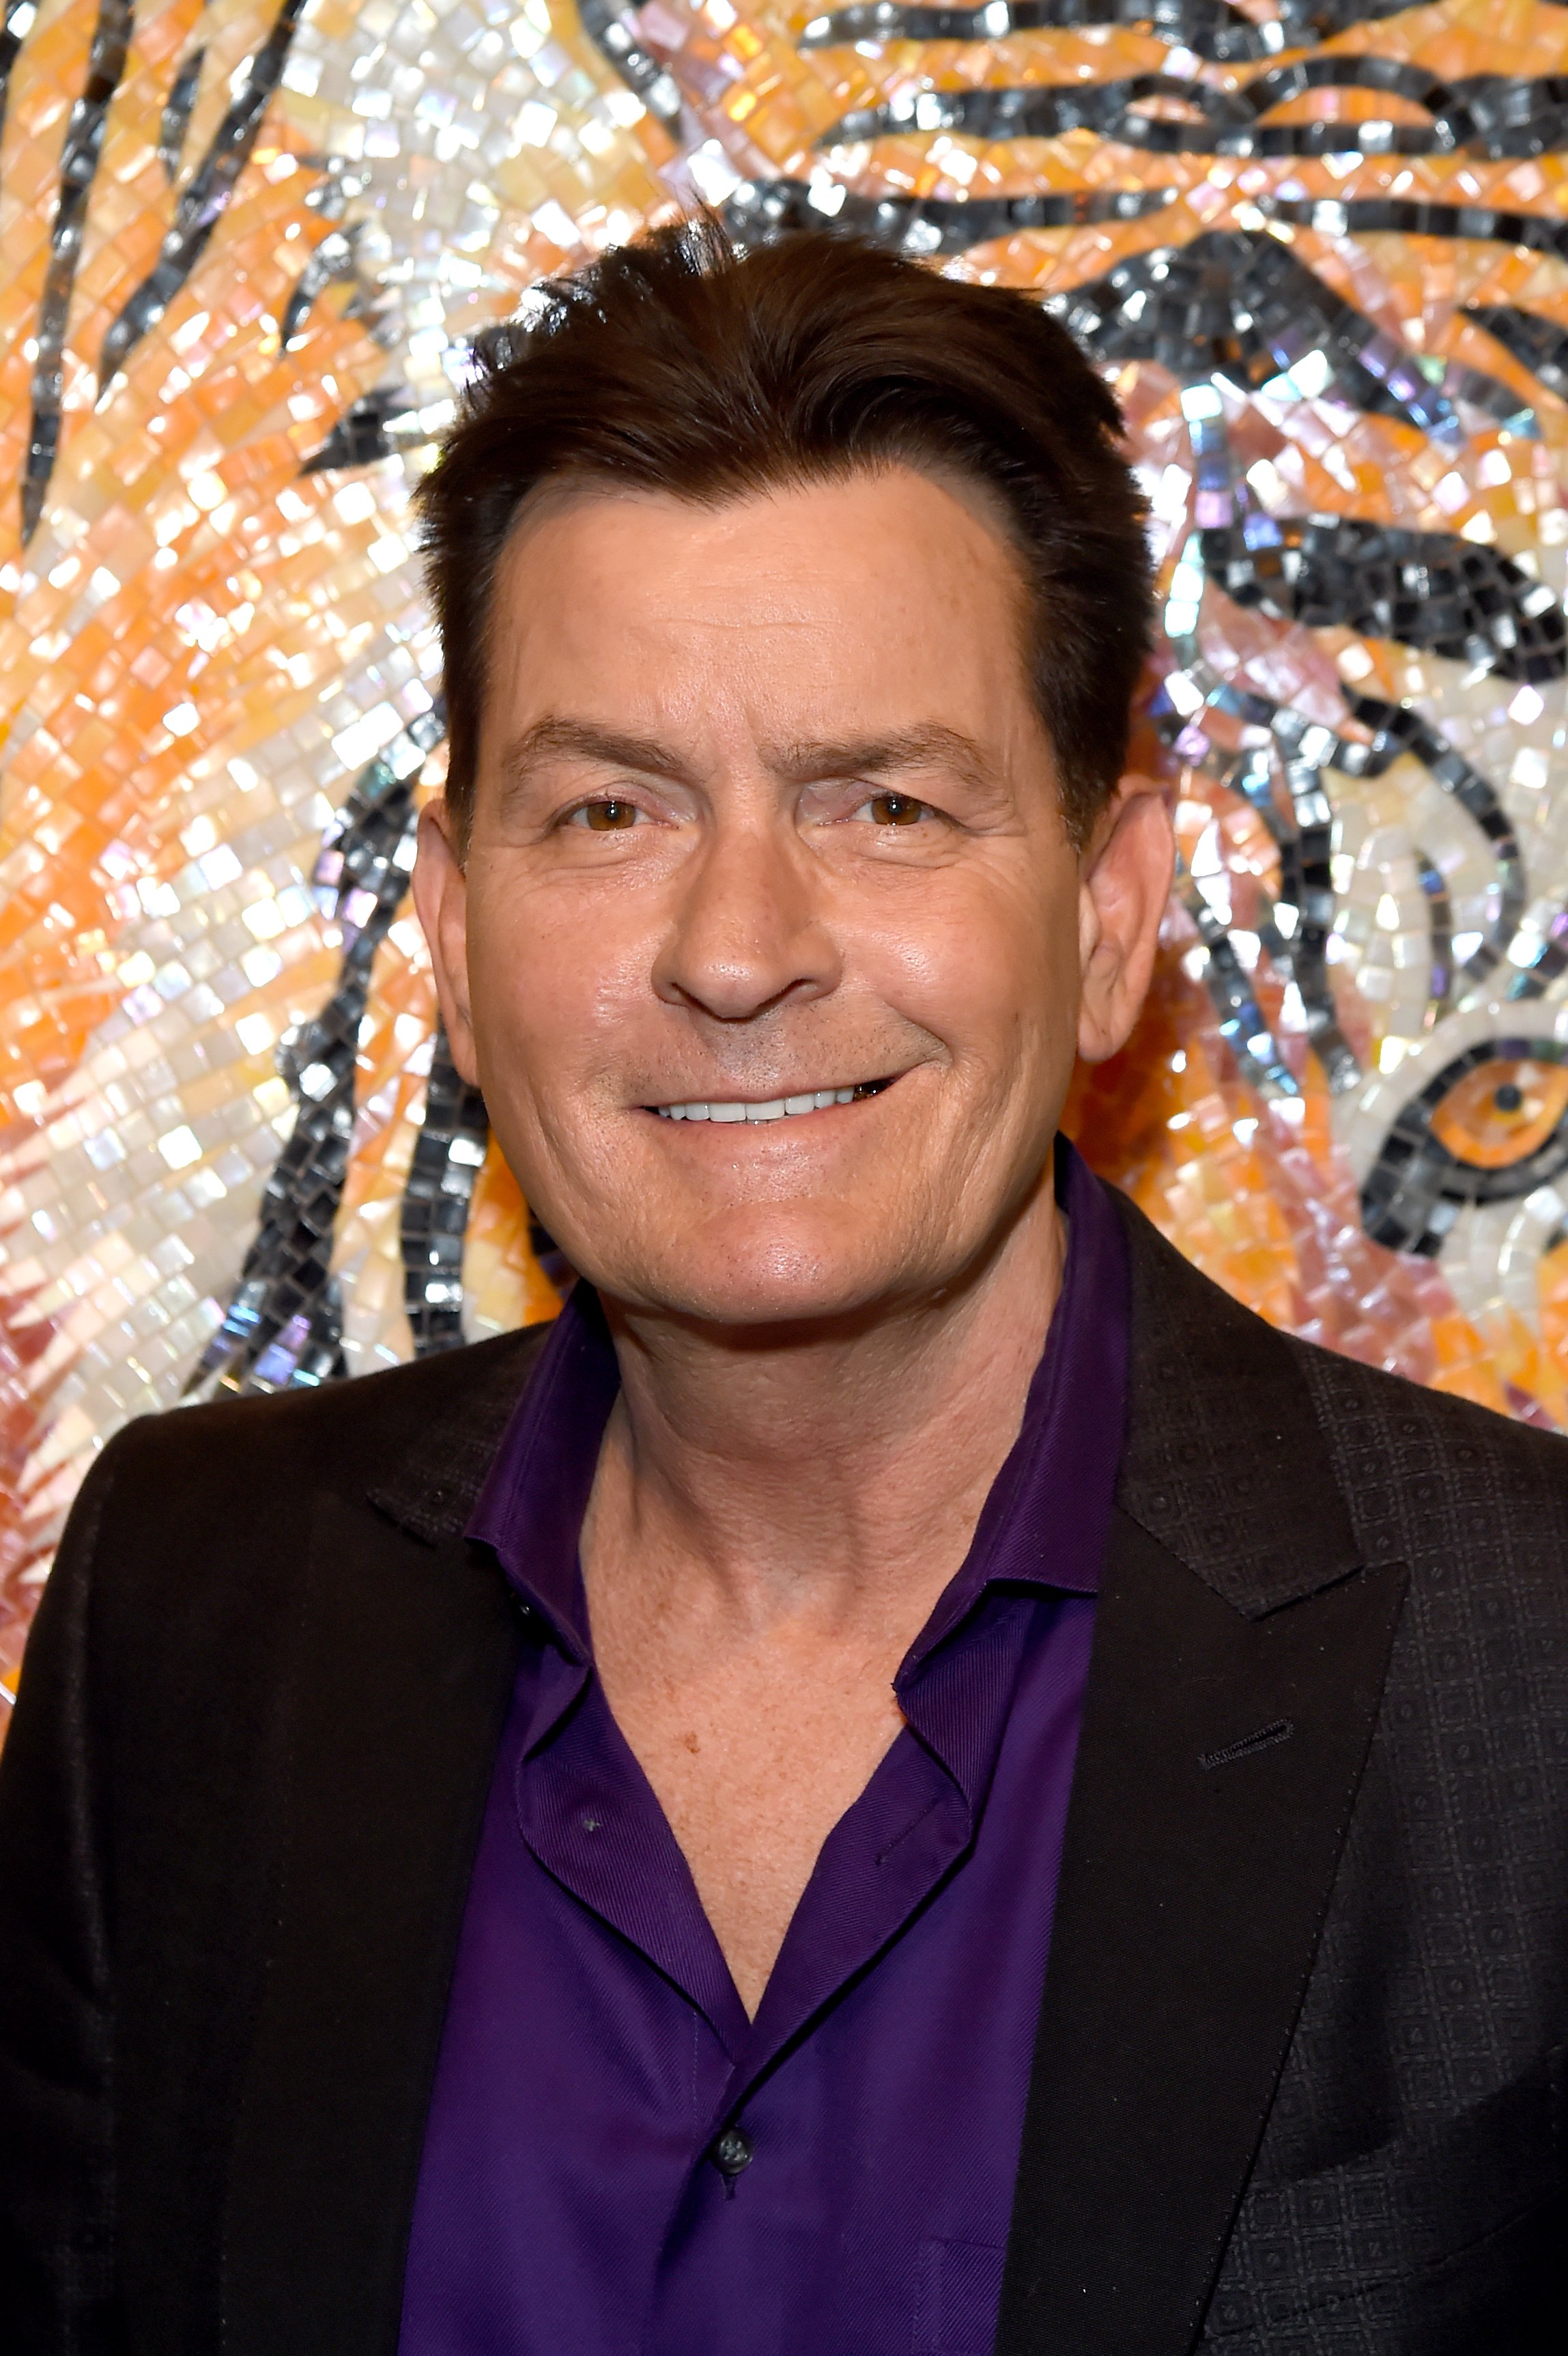 Charlie Sheen attending an event in his honor called the Evening with Charlie Sheen on April 9, 2019, in London | Source: Getty Images